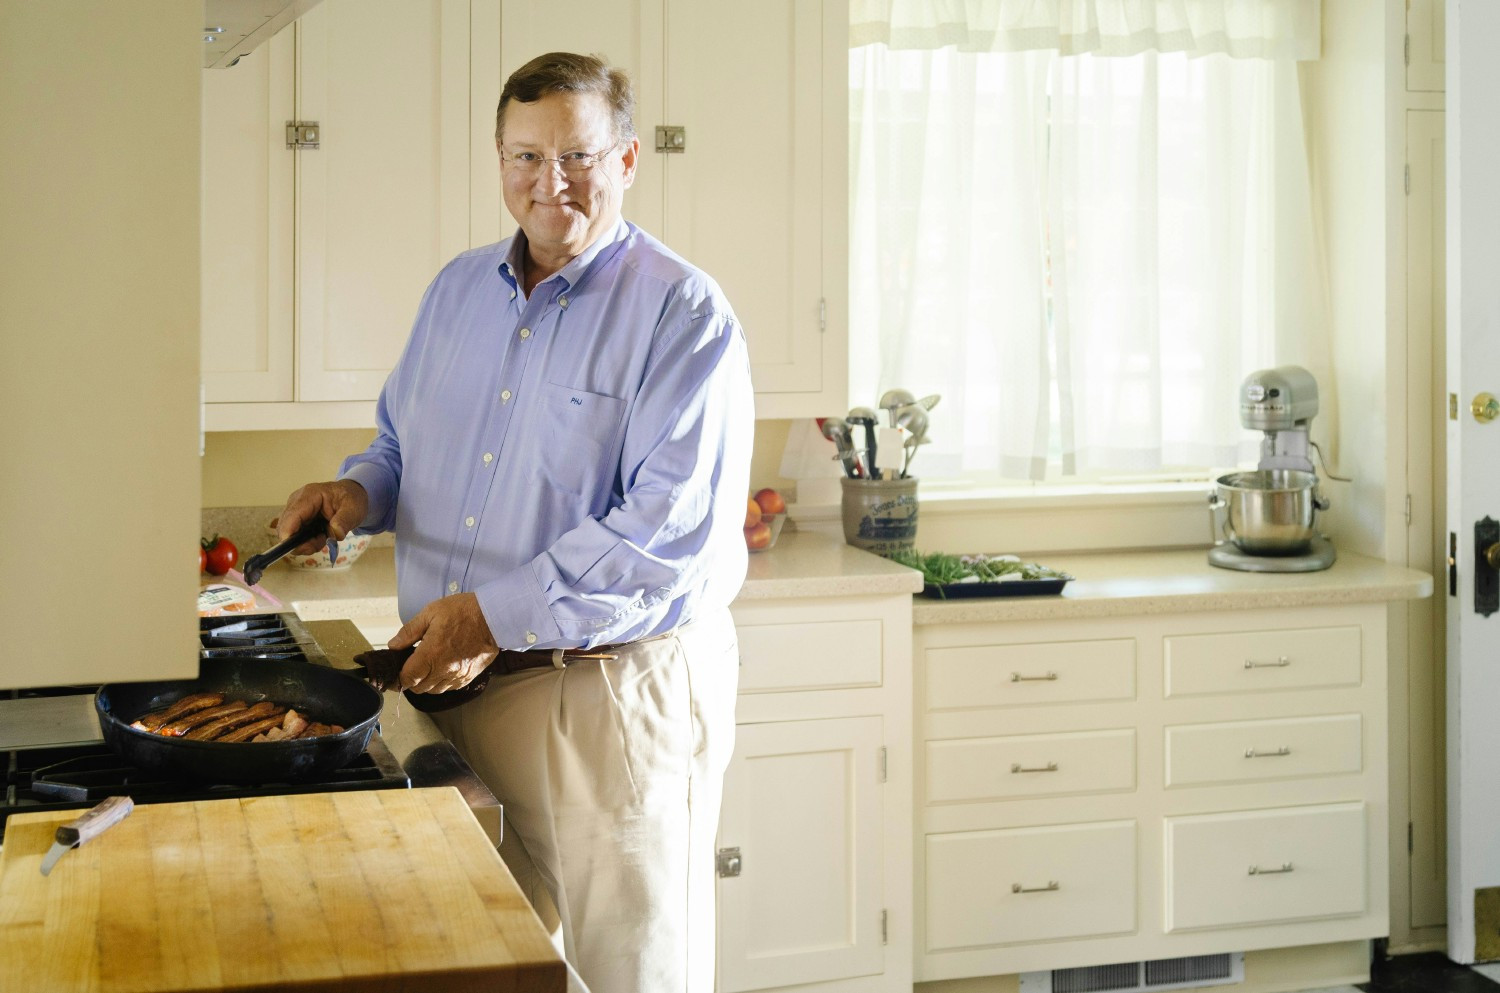 A training supervisor observing an employee inspect cooked sausage as it exits the oven.